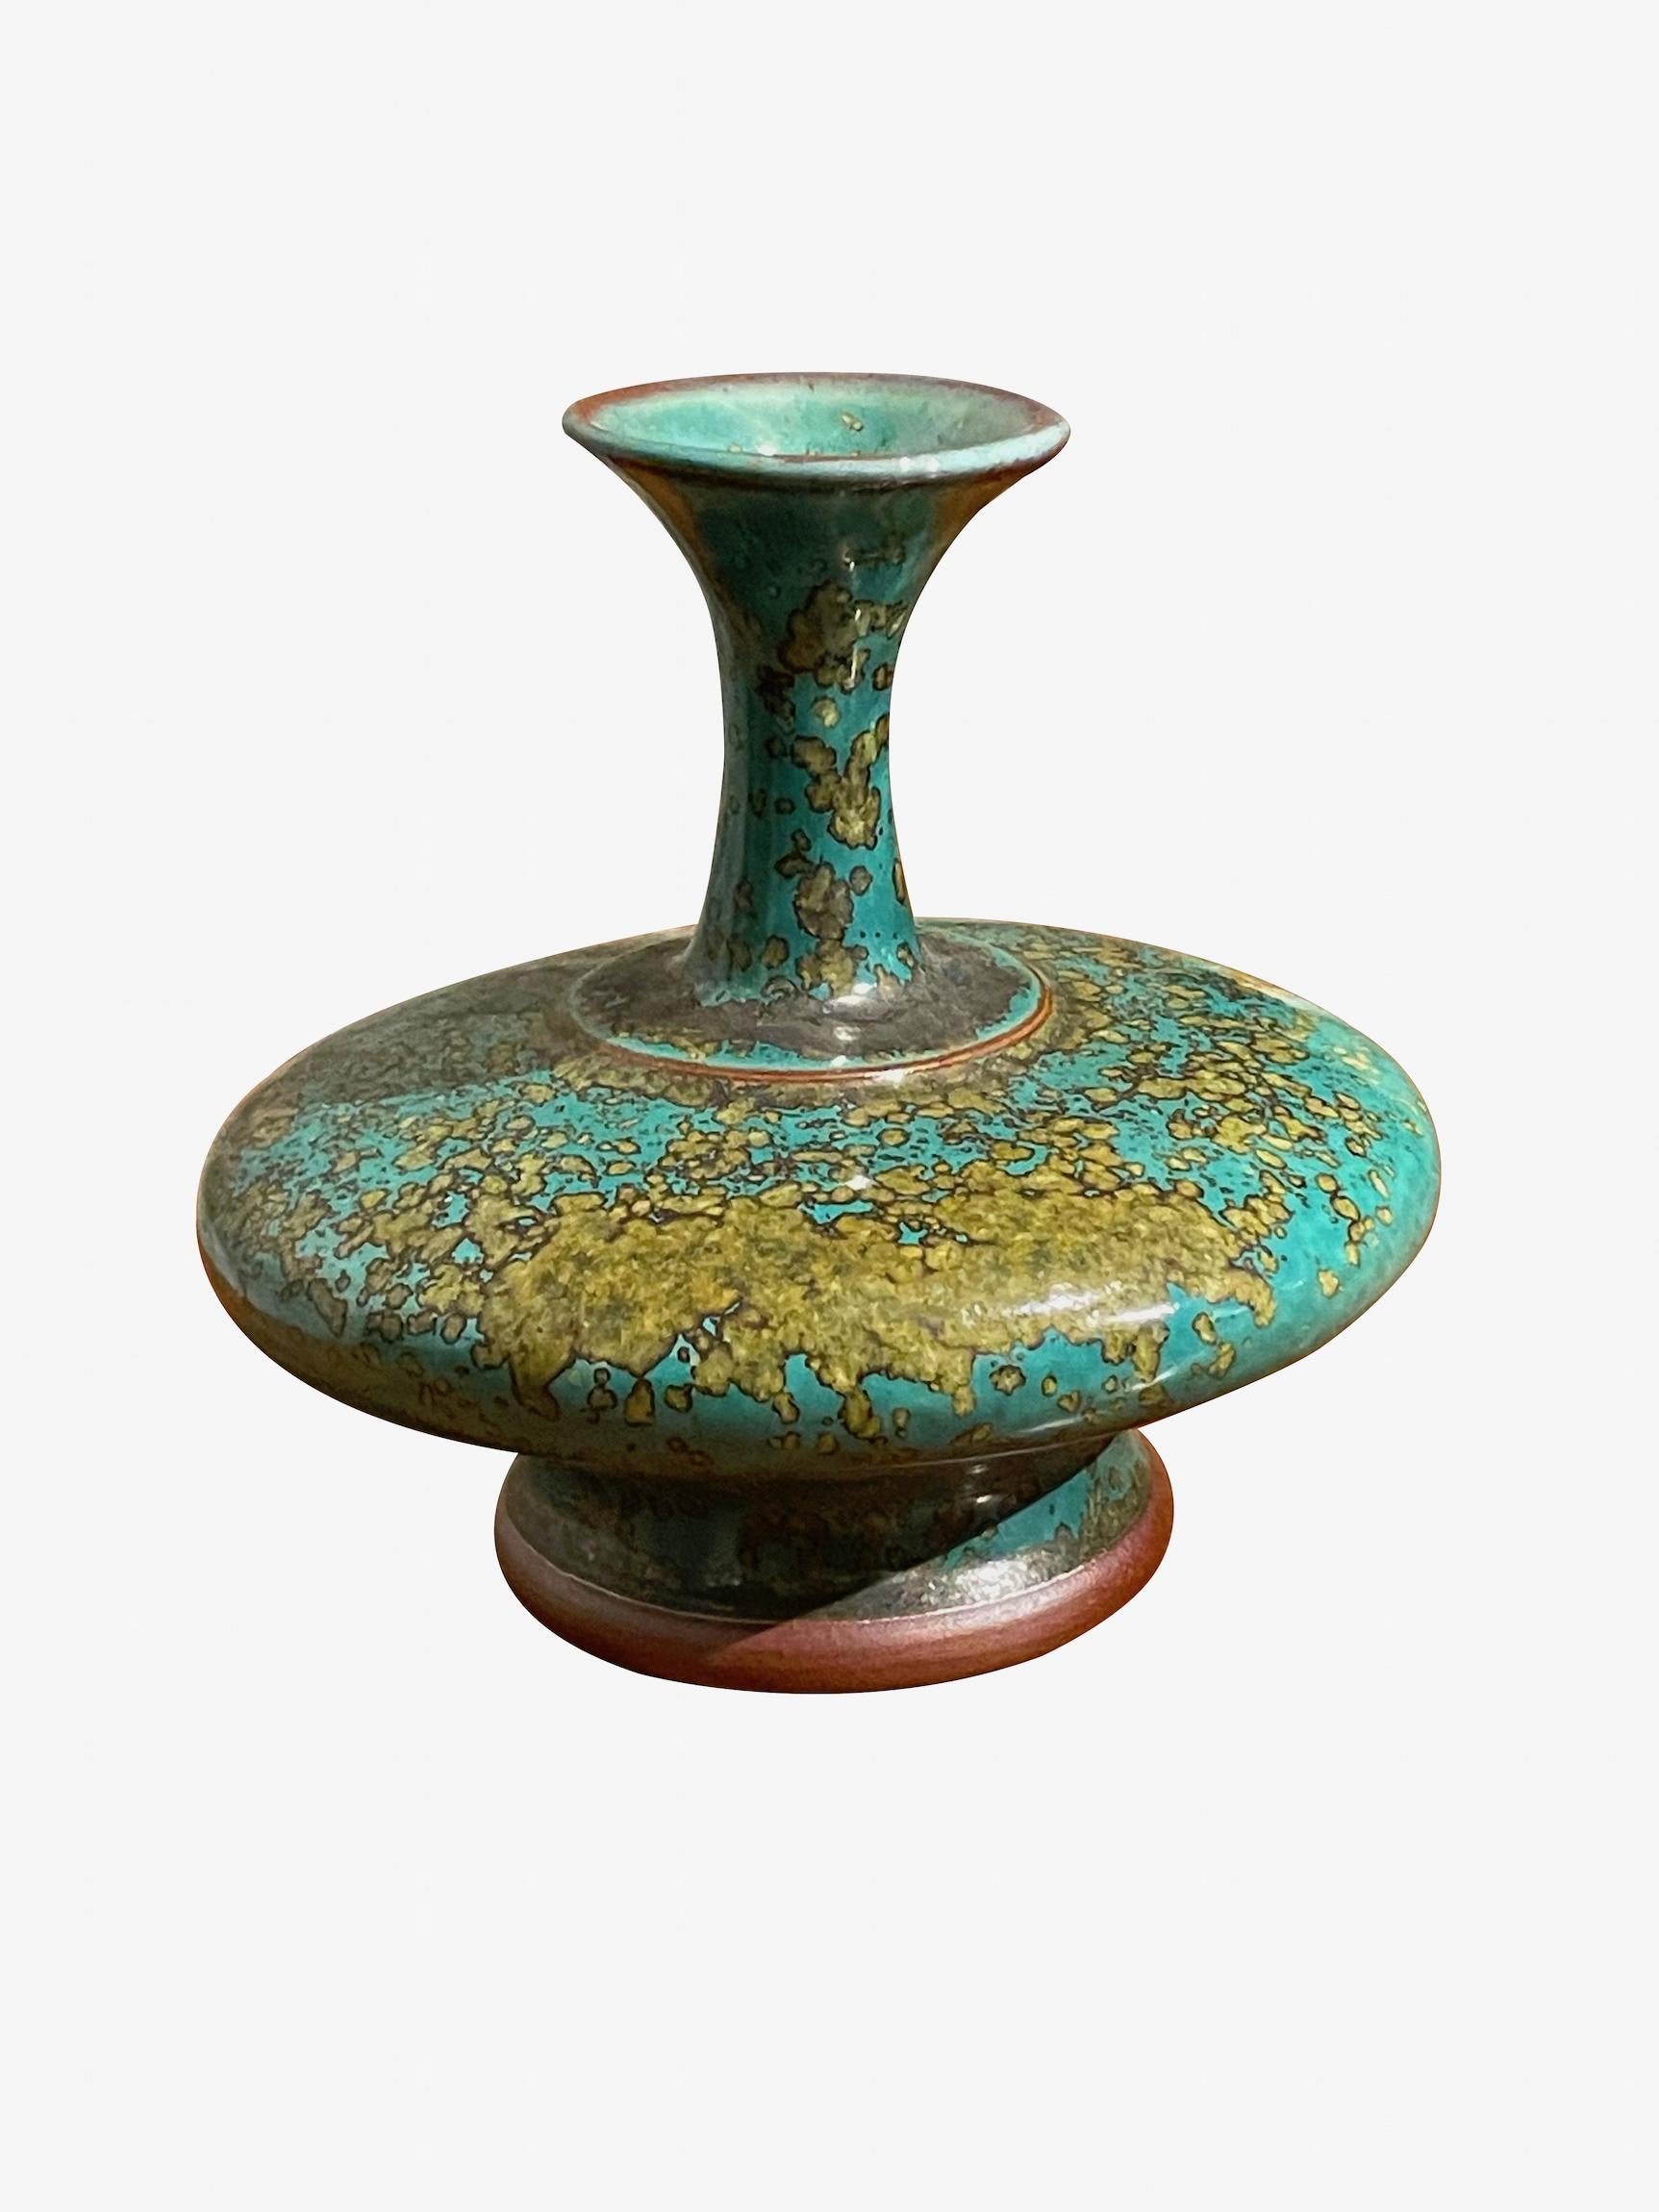 Contemporary Chinese turquoise with gold speckled glaze vase.
Flat shaped base with tall thin neck with wide spout opening.
One of several pieces from a large collection.